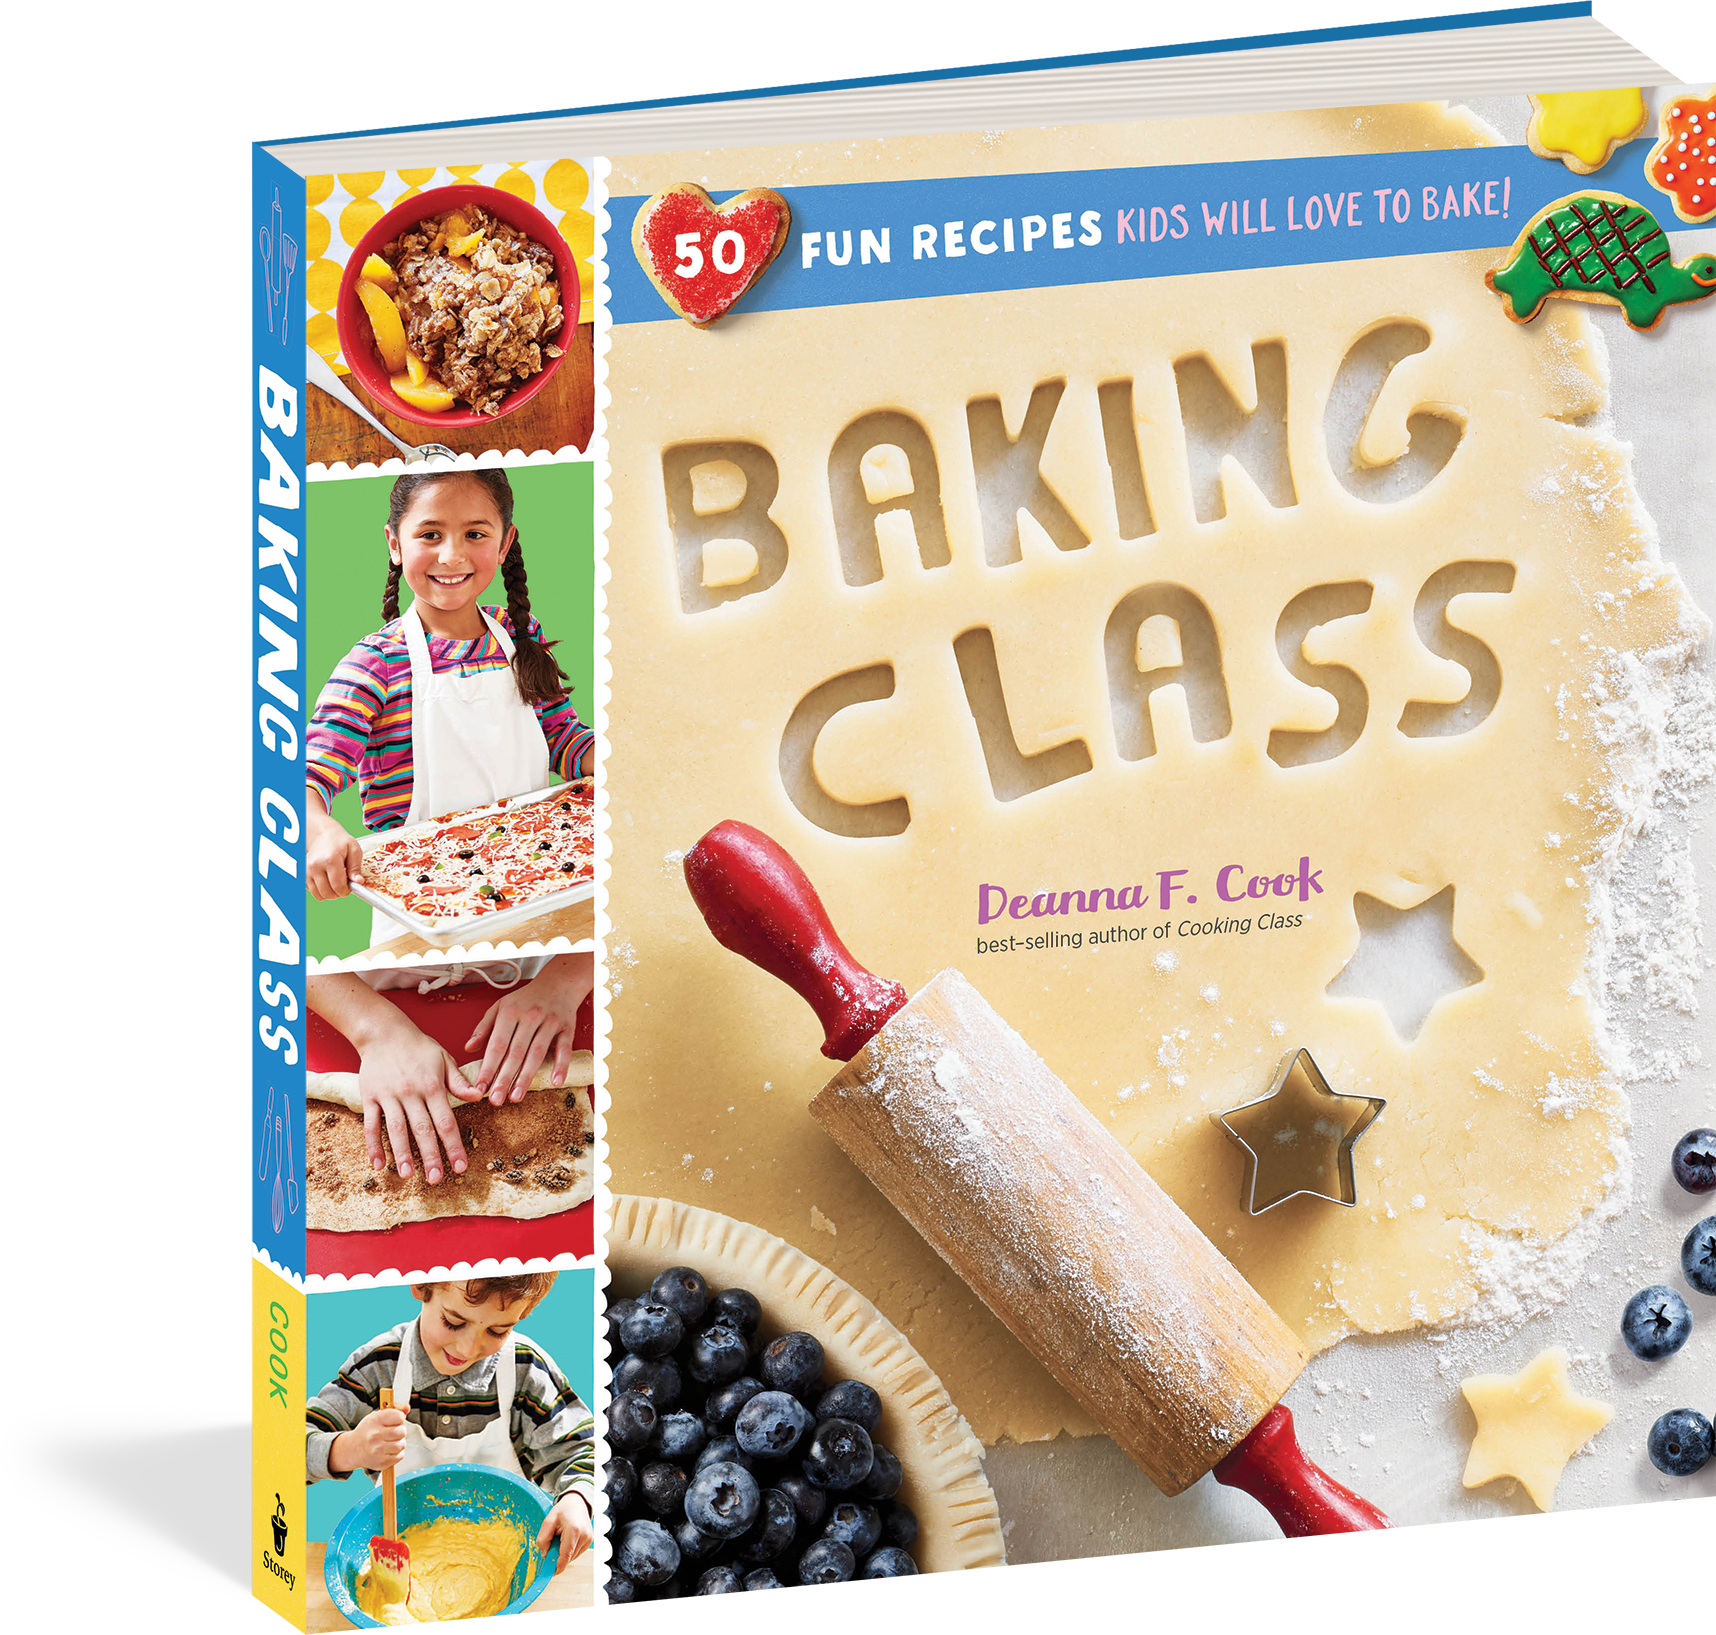 Baking Class: 50 Fun Recipes Kids Will Love to Bake! by Deanna F. Cook